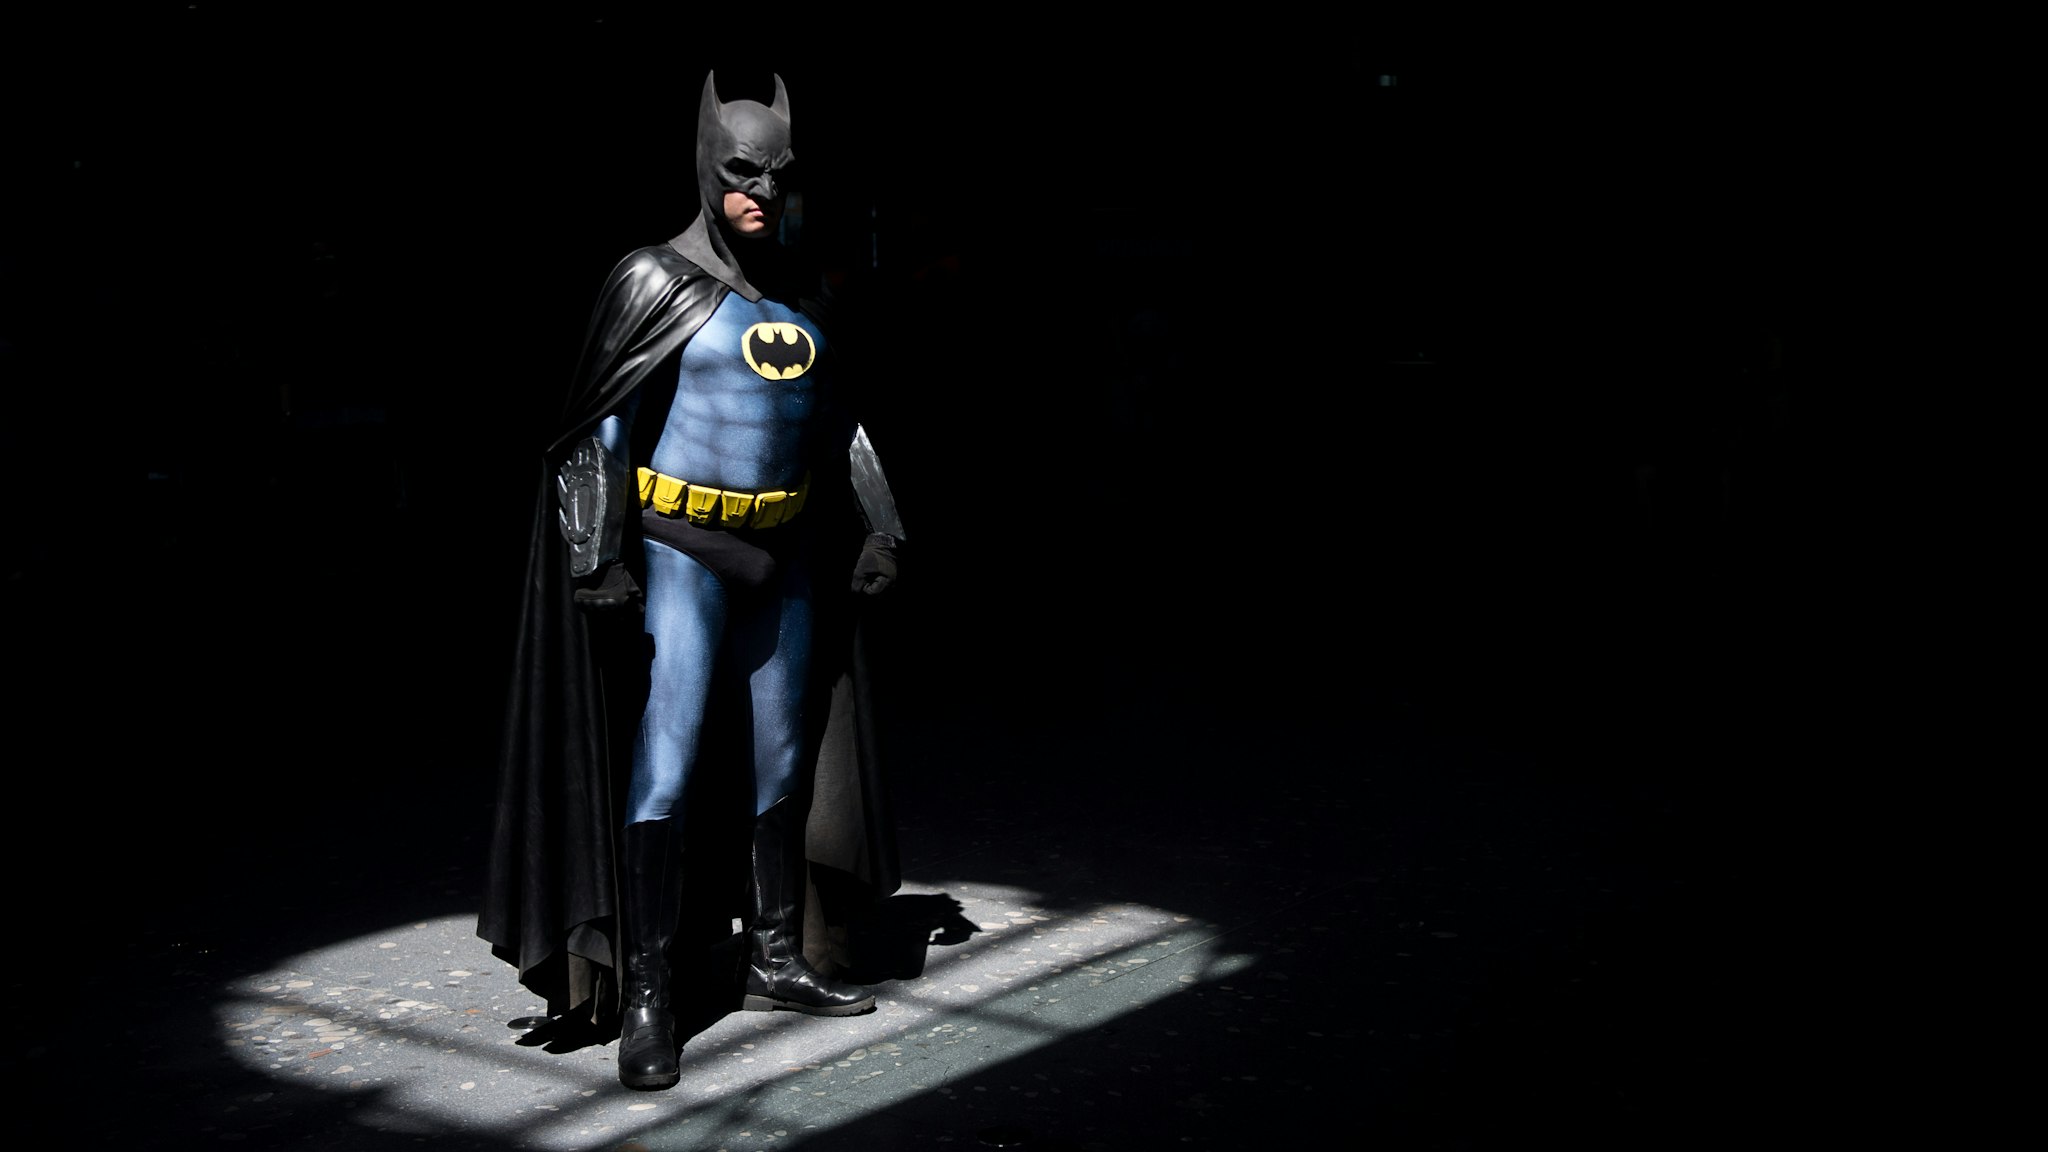 30 June 2018, Germany, Stuttgart: A cosplayer wearing a batman outfit standing in the spotlight during the first day of the pop culture fair "Comic Con Germany" at the Stuttgart trade fair. The fair is taking place from 30 June to 01 July. Photo: Sebastian Gollnow/dpa (Photo by Sebastian Gollnow/picture alliance via Getty Images)